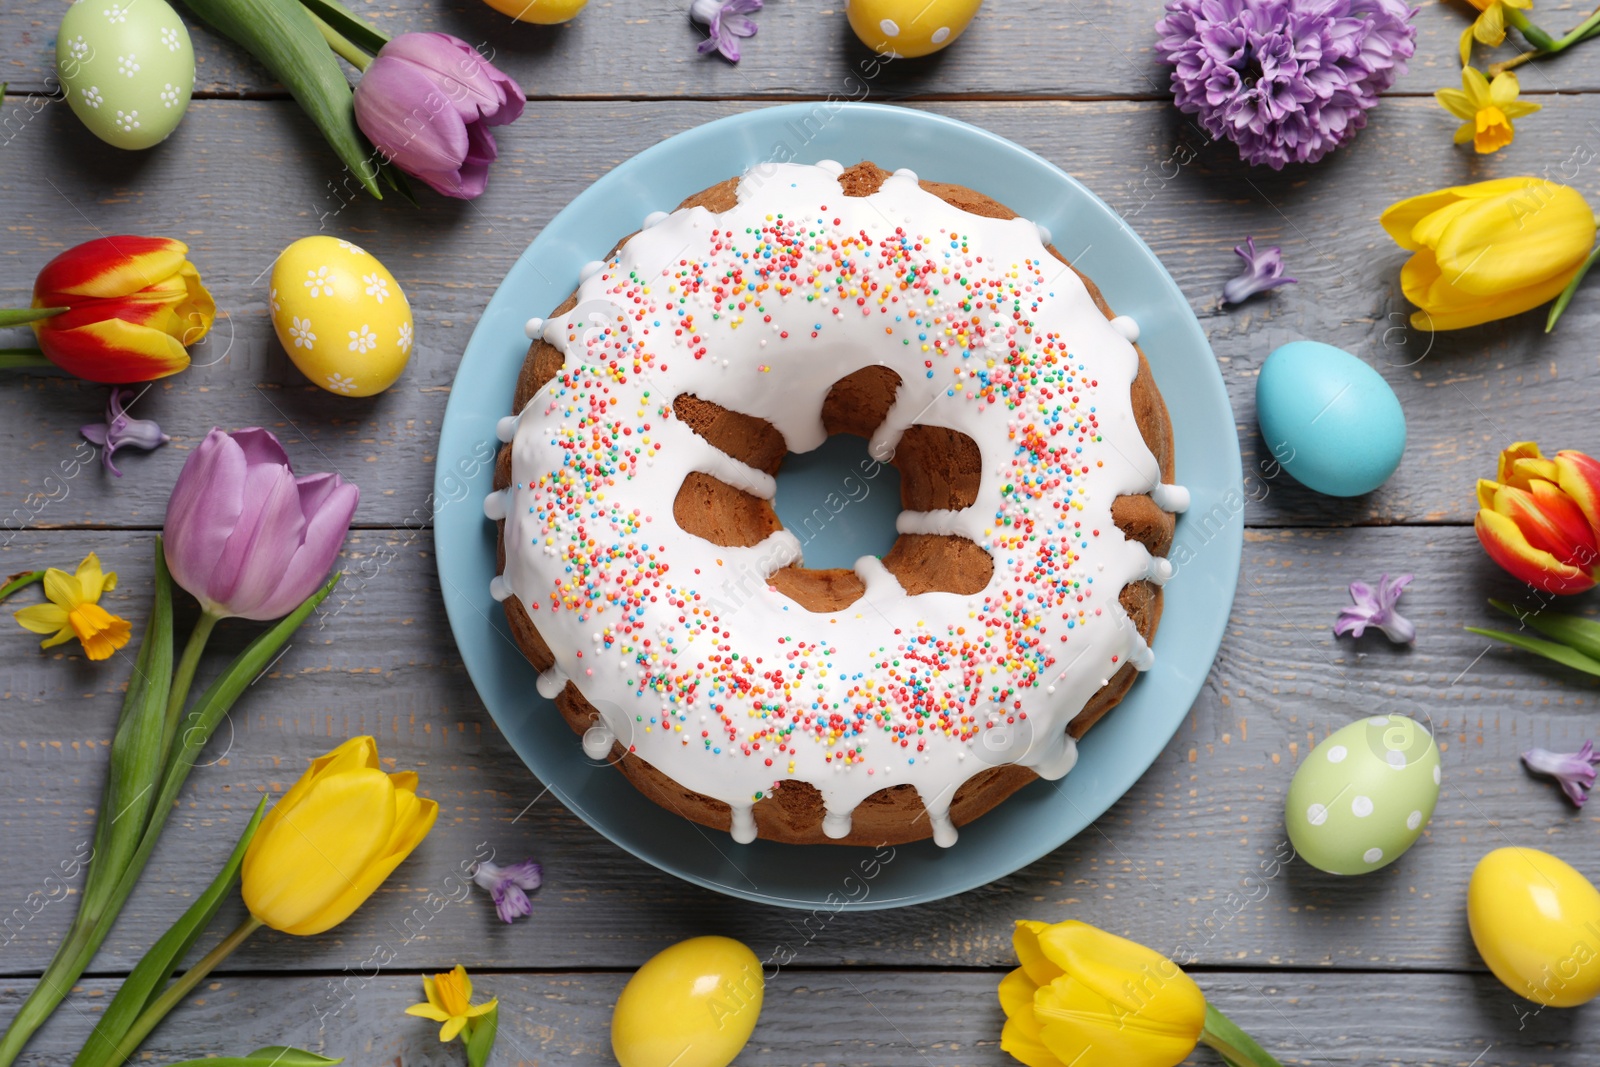 Photo of Glazed Easter cake with sprinkles, painted eggs and flowers on grey wooden table, flat lay